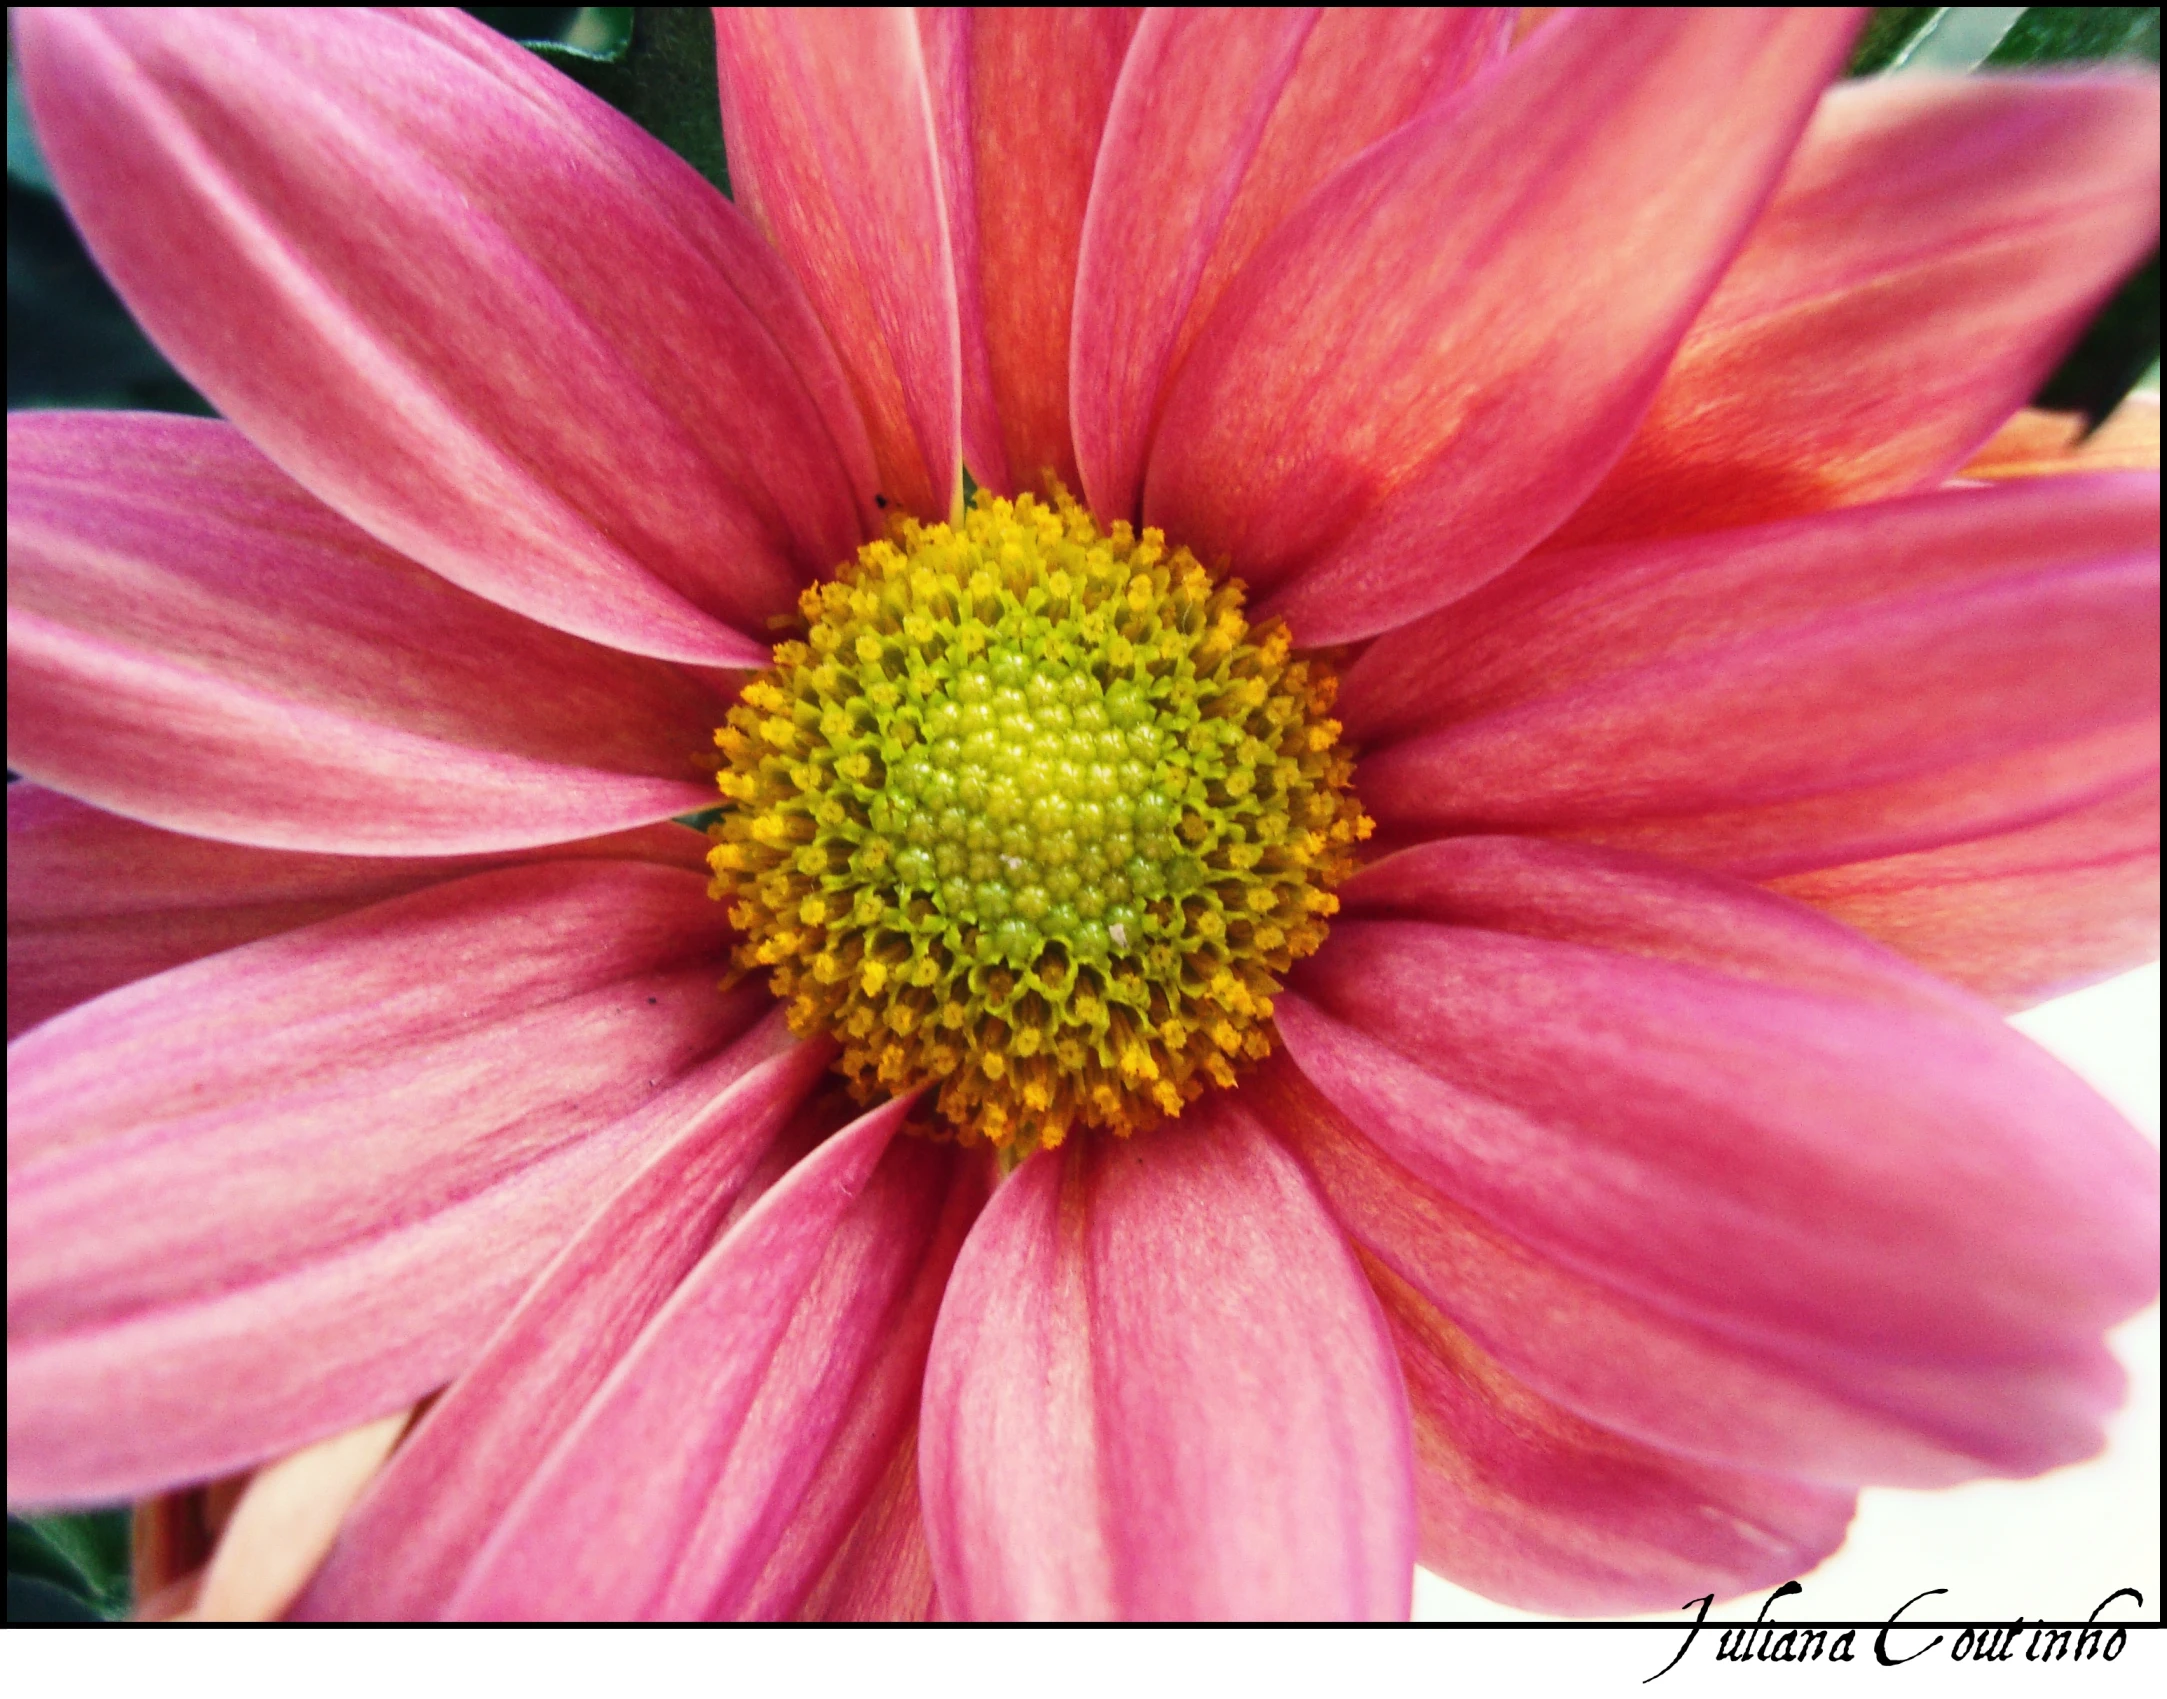 close up picture of a pink flower in bloom